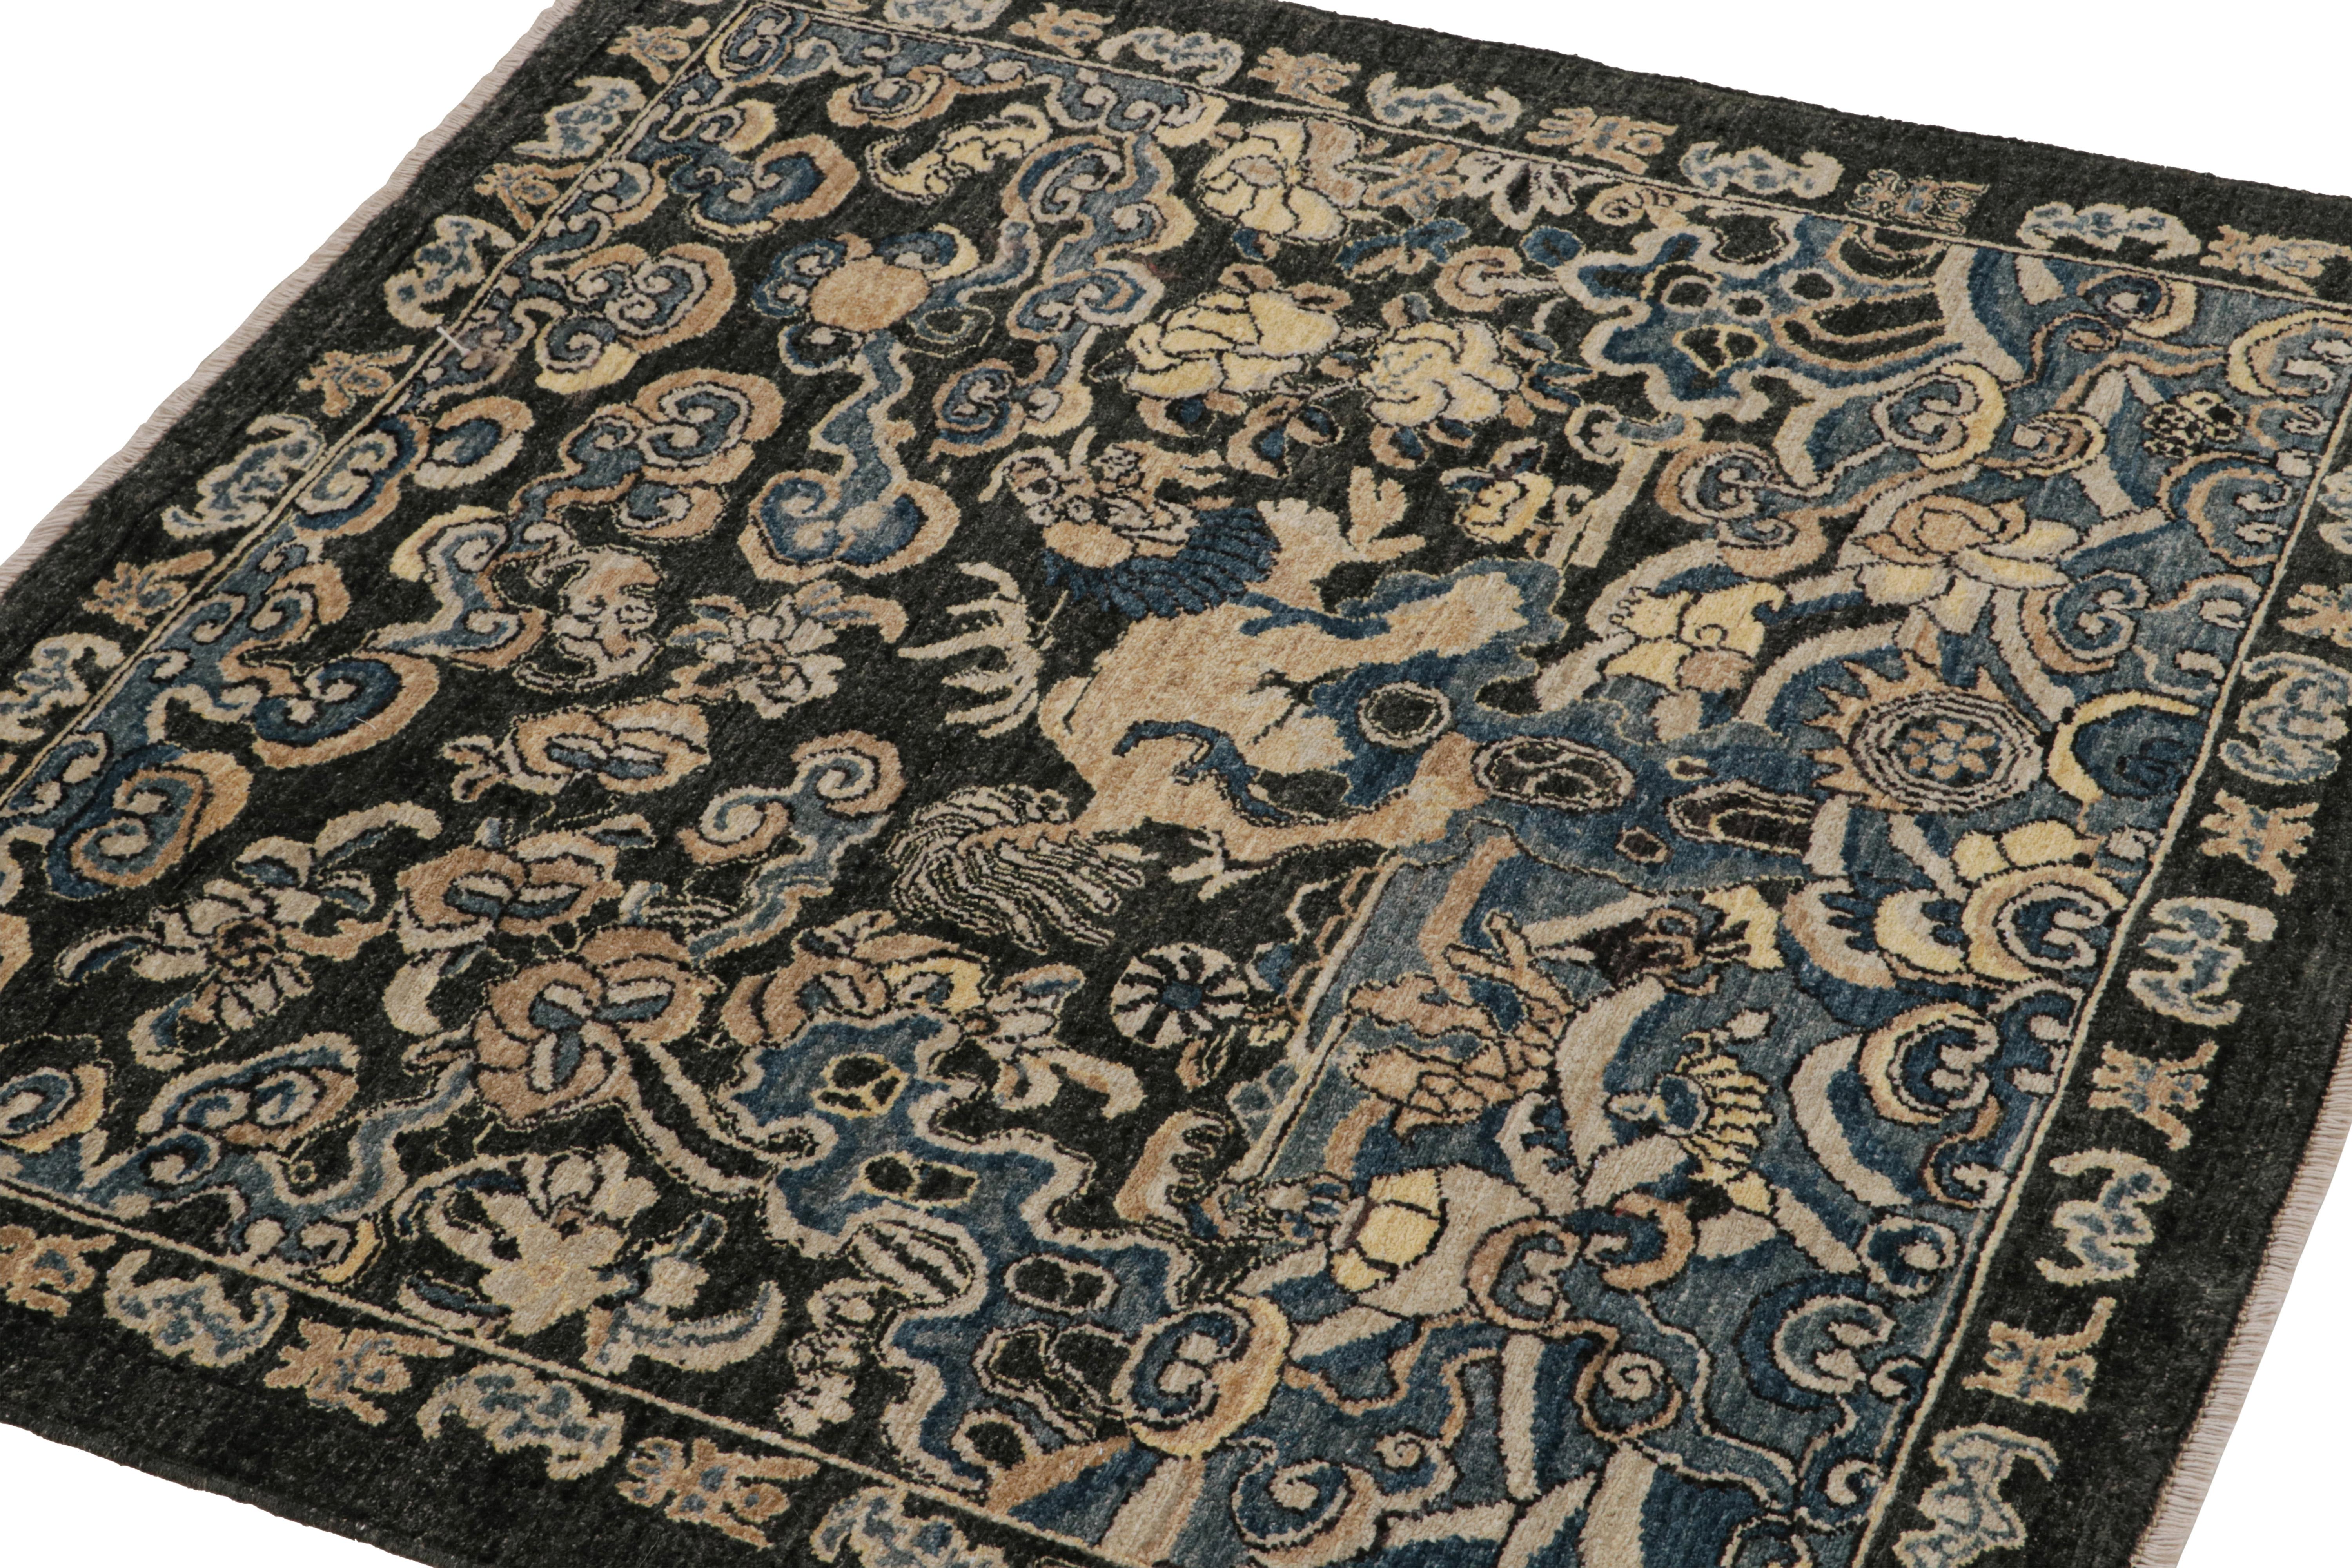 Hand-knotted in wool, this 4x4 square rug has been inspired by antique Chinese pictorial rugs—specifically animal rugs with mythological references of the most regal look.

On the Design: 

This particular design recaptures a Kirin (or “Qilin” in